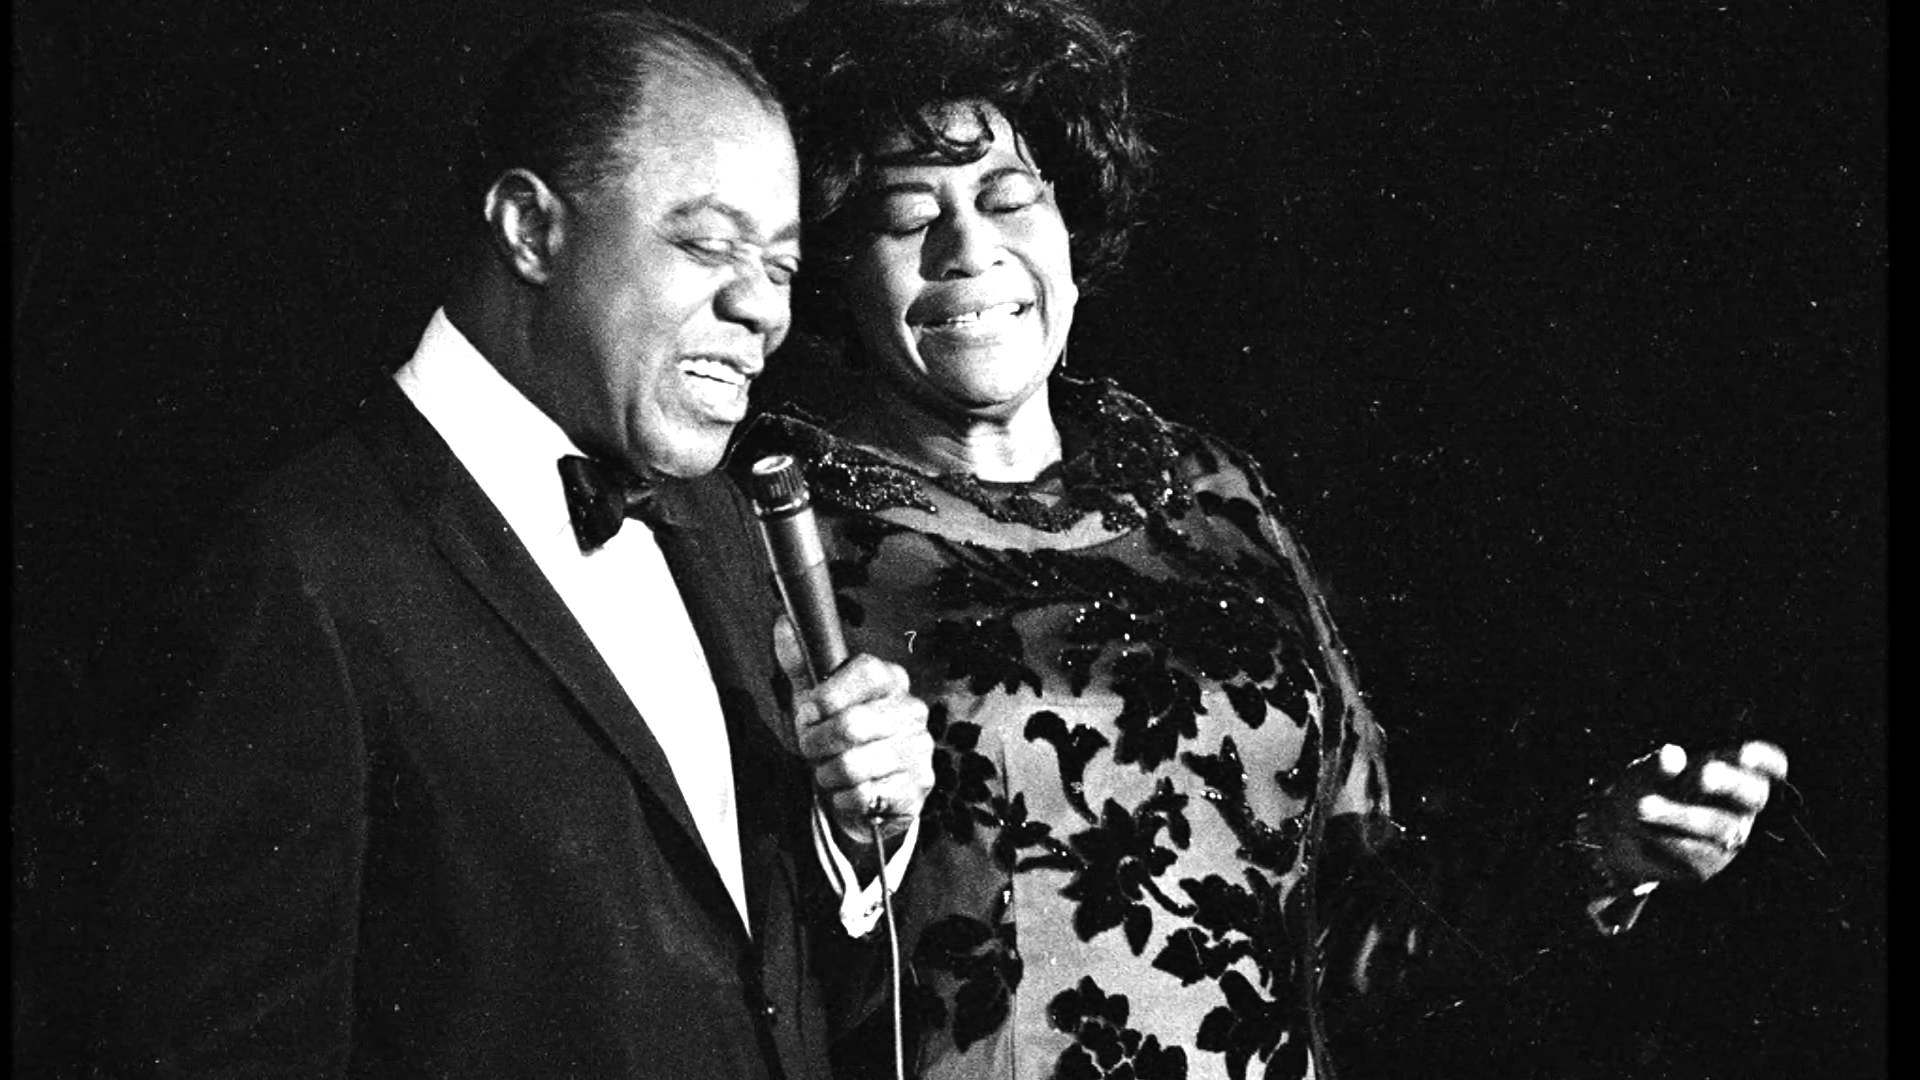 Can't We Be Friends - Louis Armstrong & Ella Fitzgerald (HD)